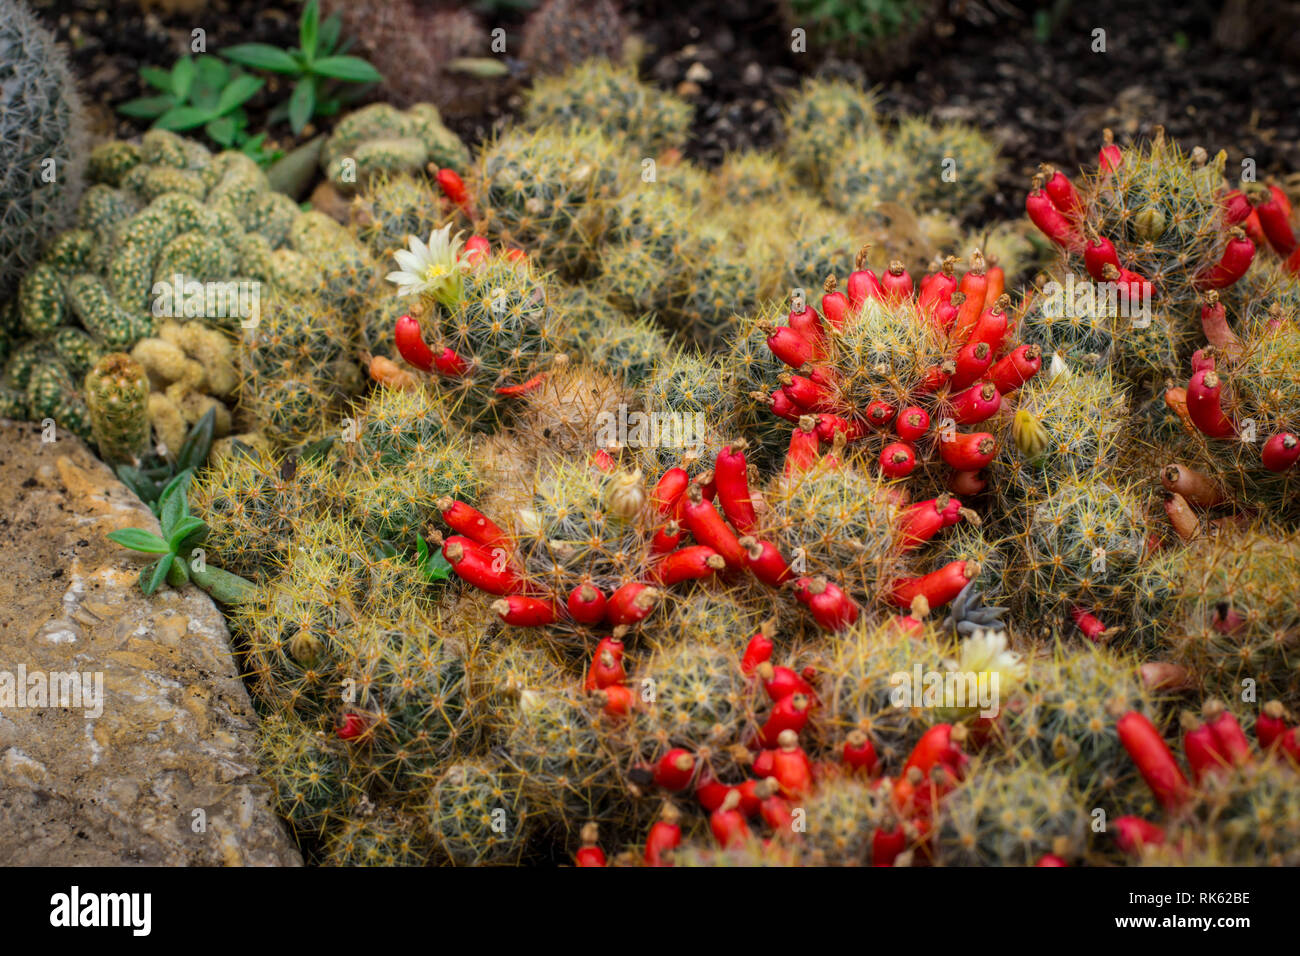 Common cacti Mammillaria prolifera with flowers and red fruits Stock Photo